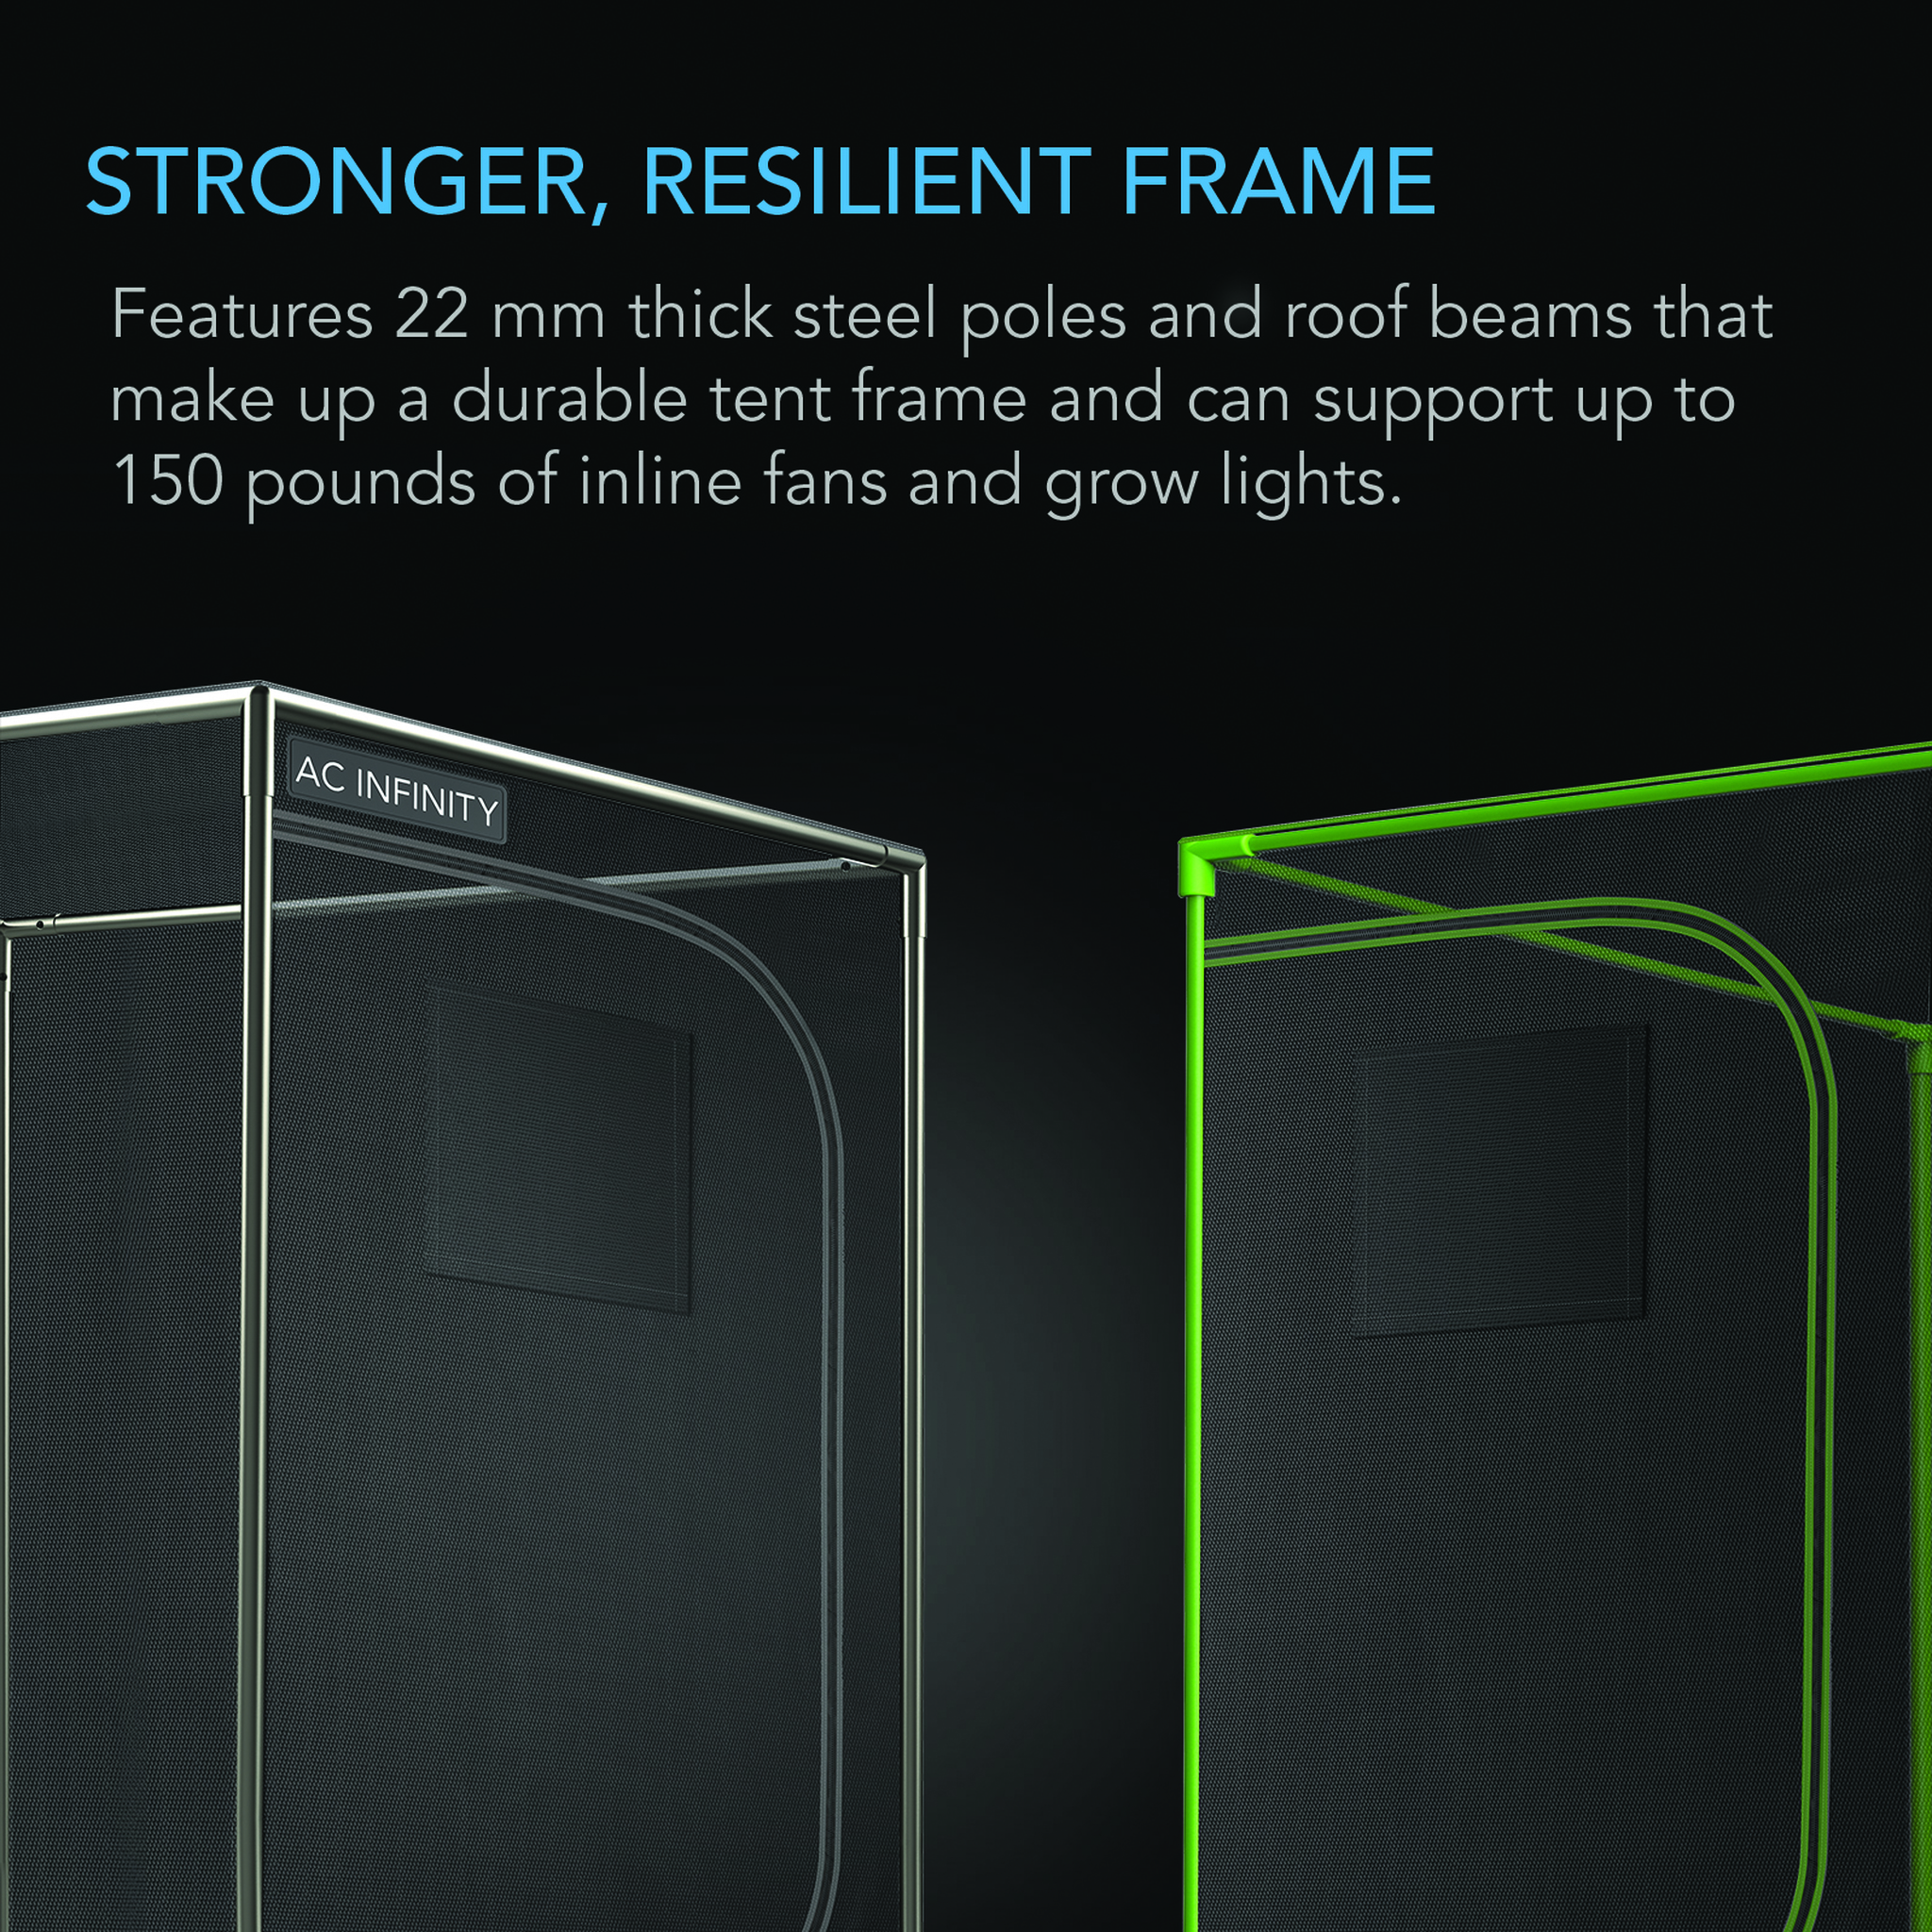 Stronger and More Resilient Frame